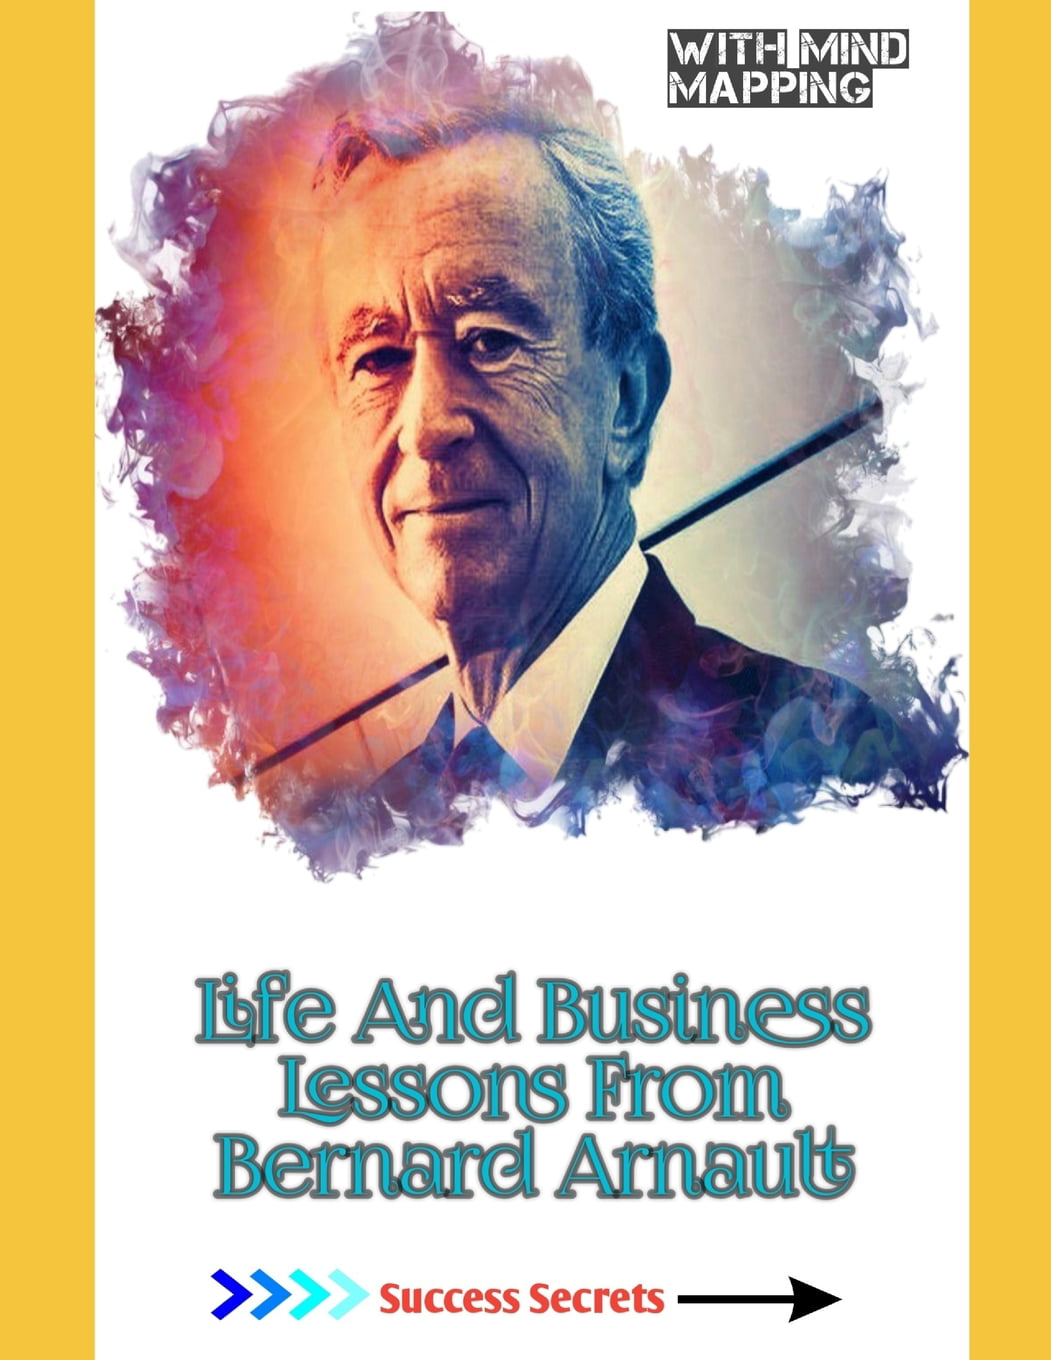 Bernard Arnault Quote: “When something has to be done, do it! In